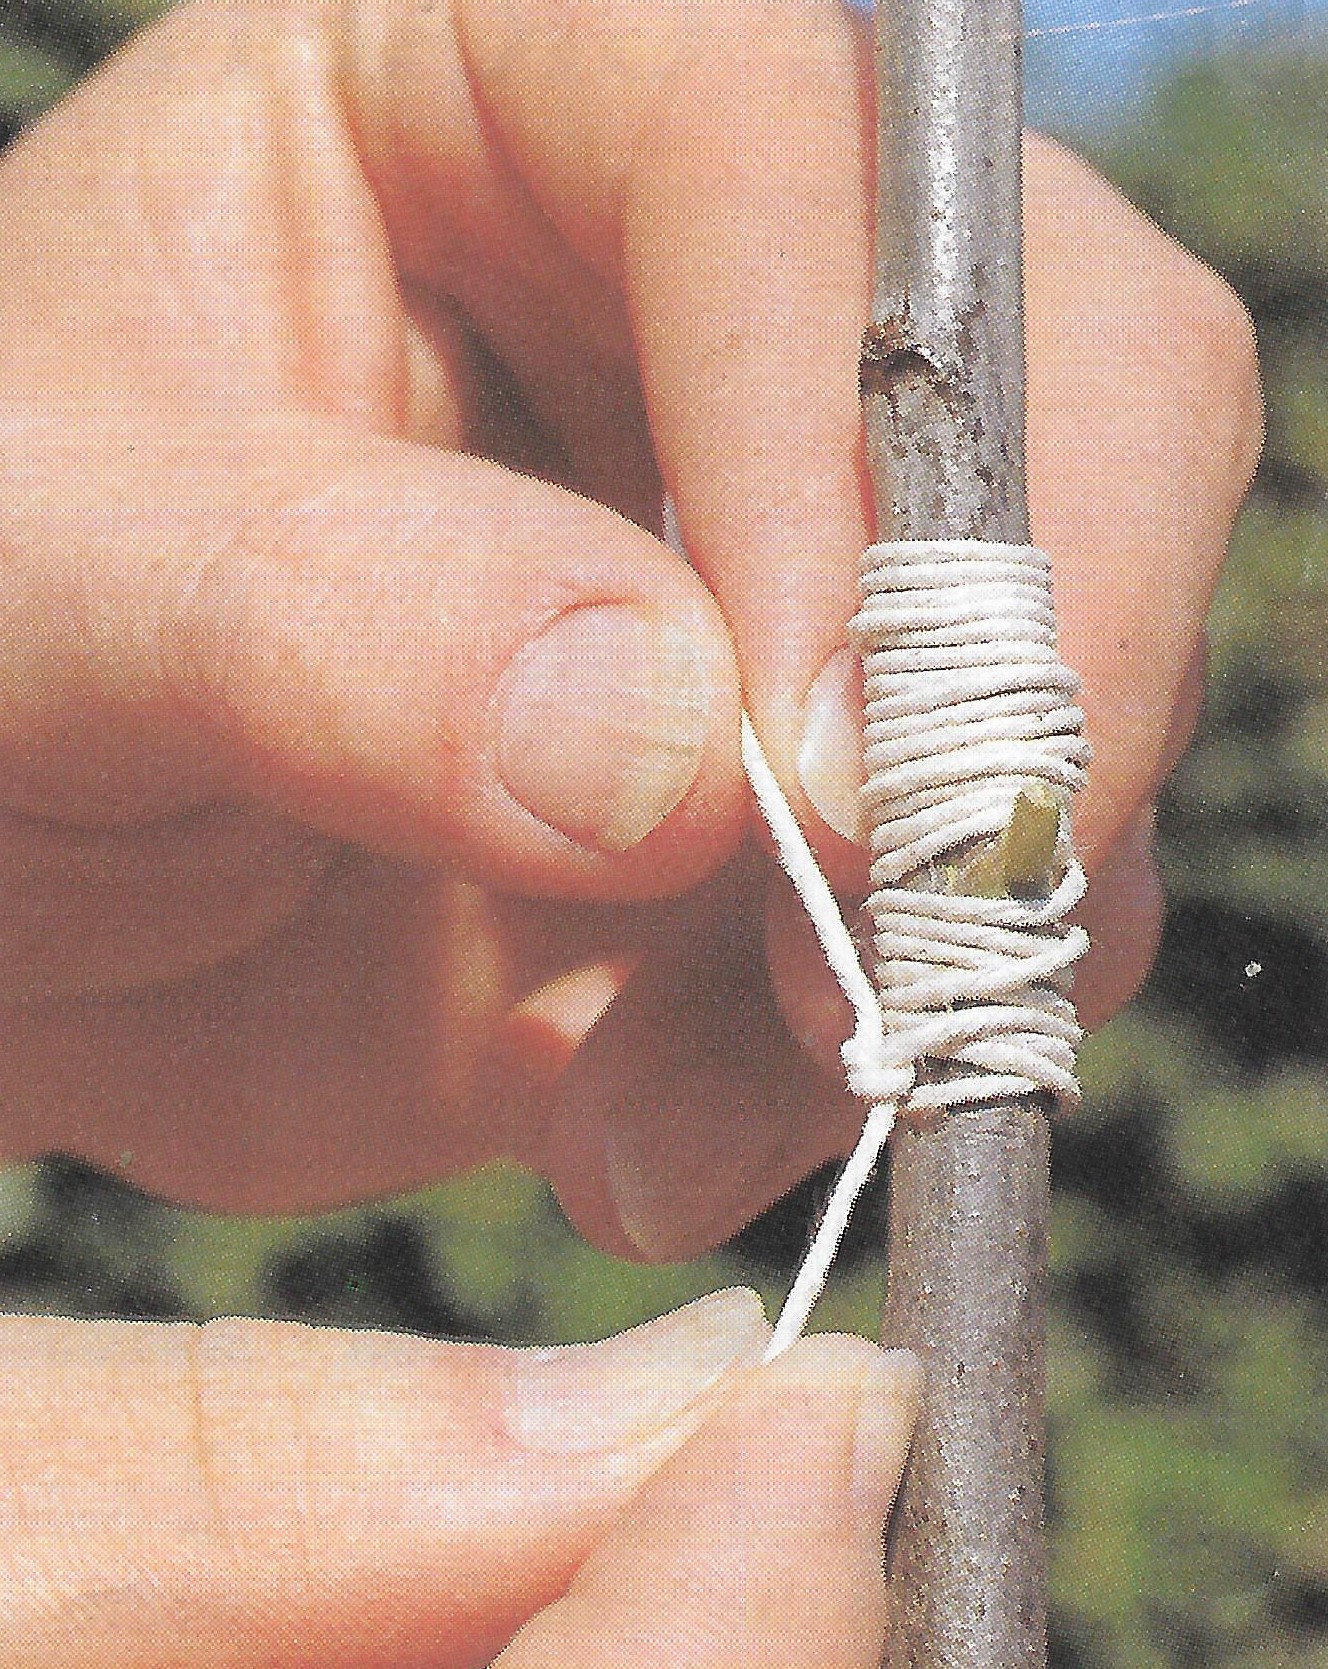 Step 4: Tie the bud in with string.